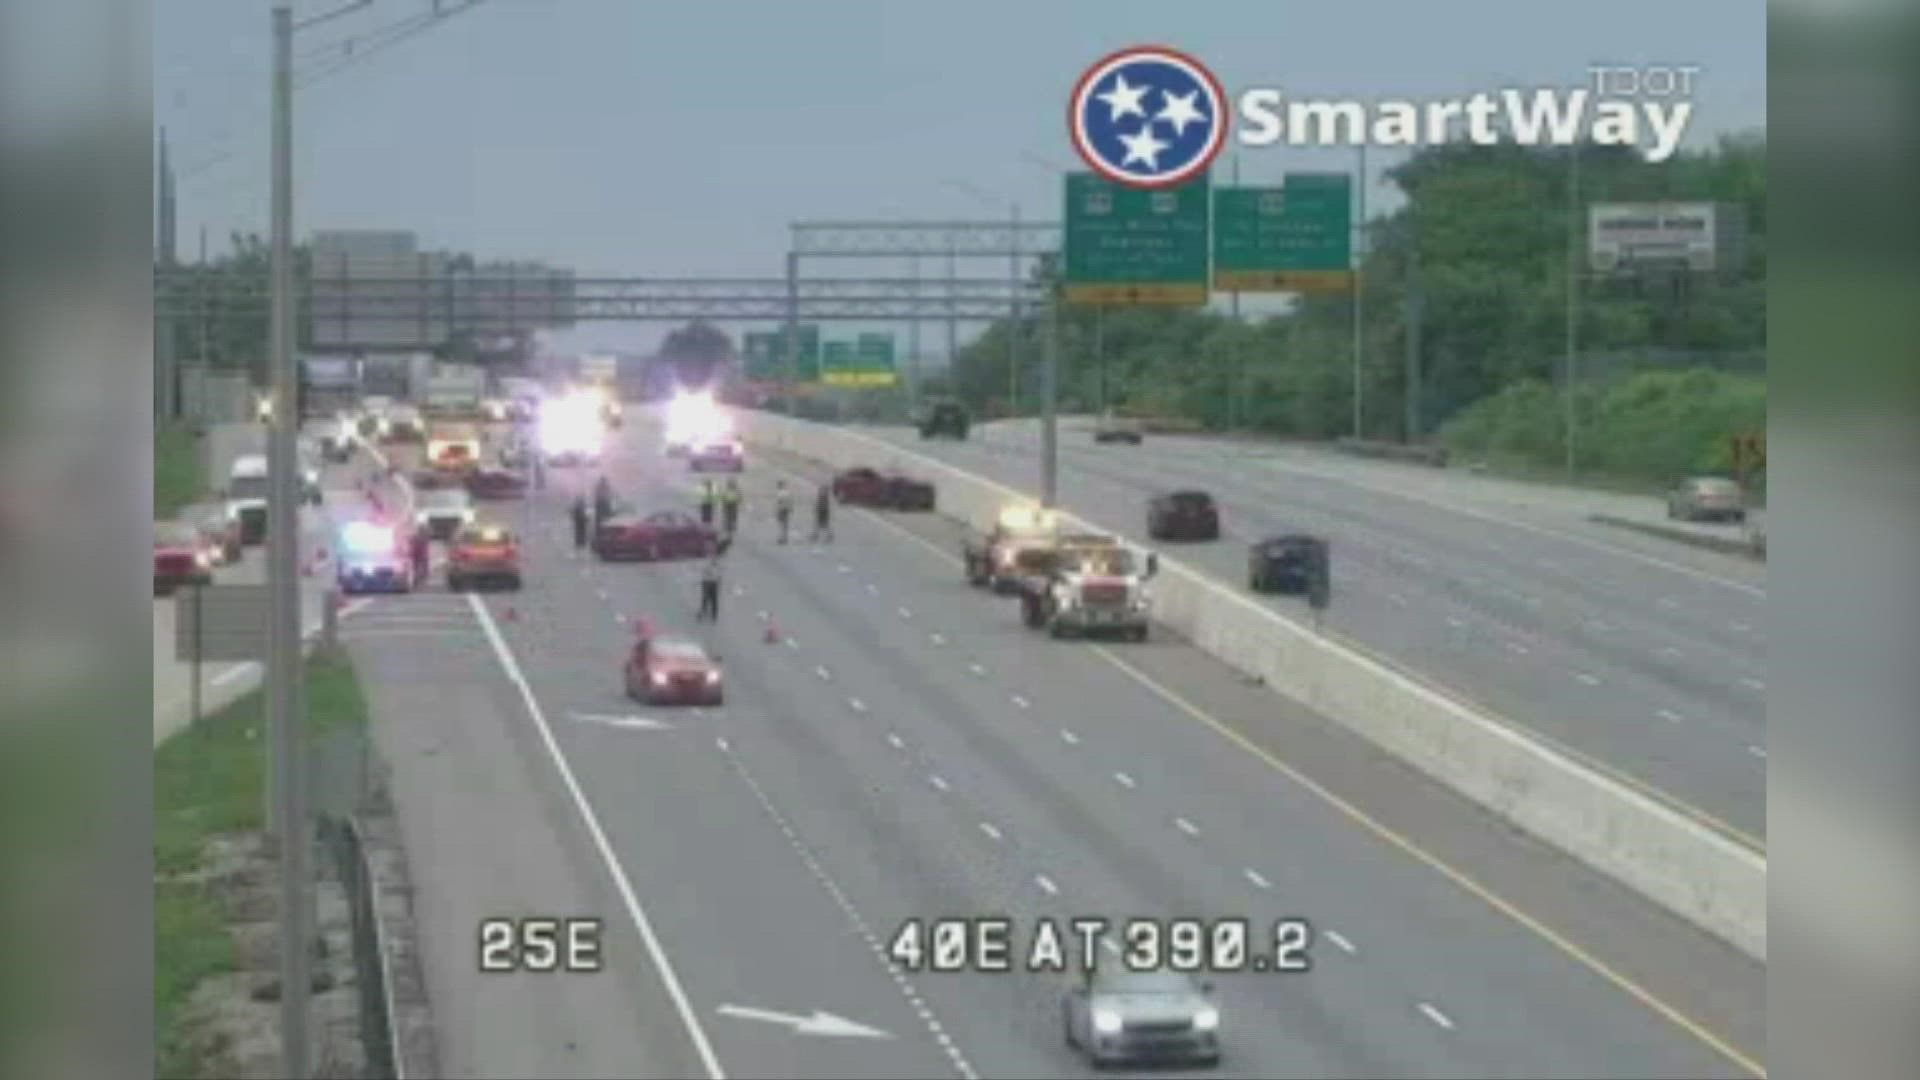 Police said one person suffered potentially life-threatening injuries after a car went the wrong way on I-40 and crashed into two other cars head-on.